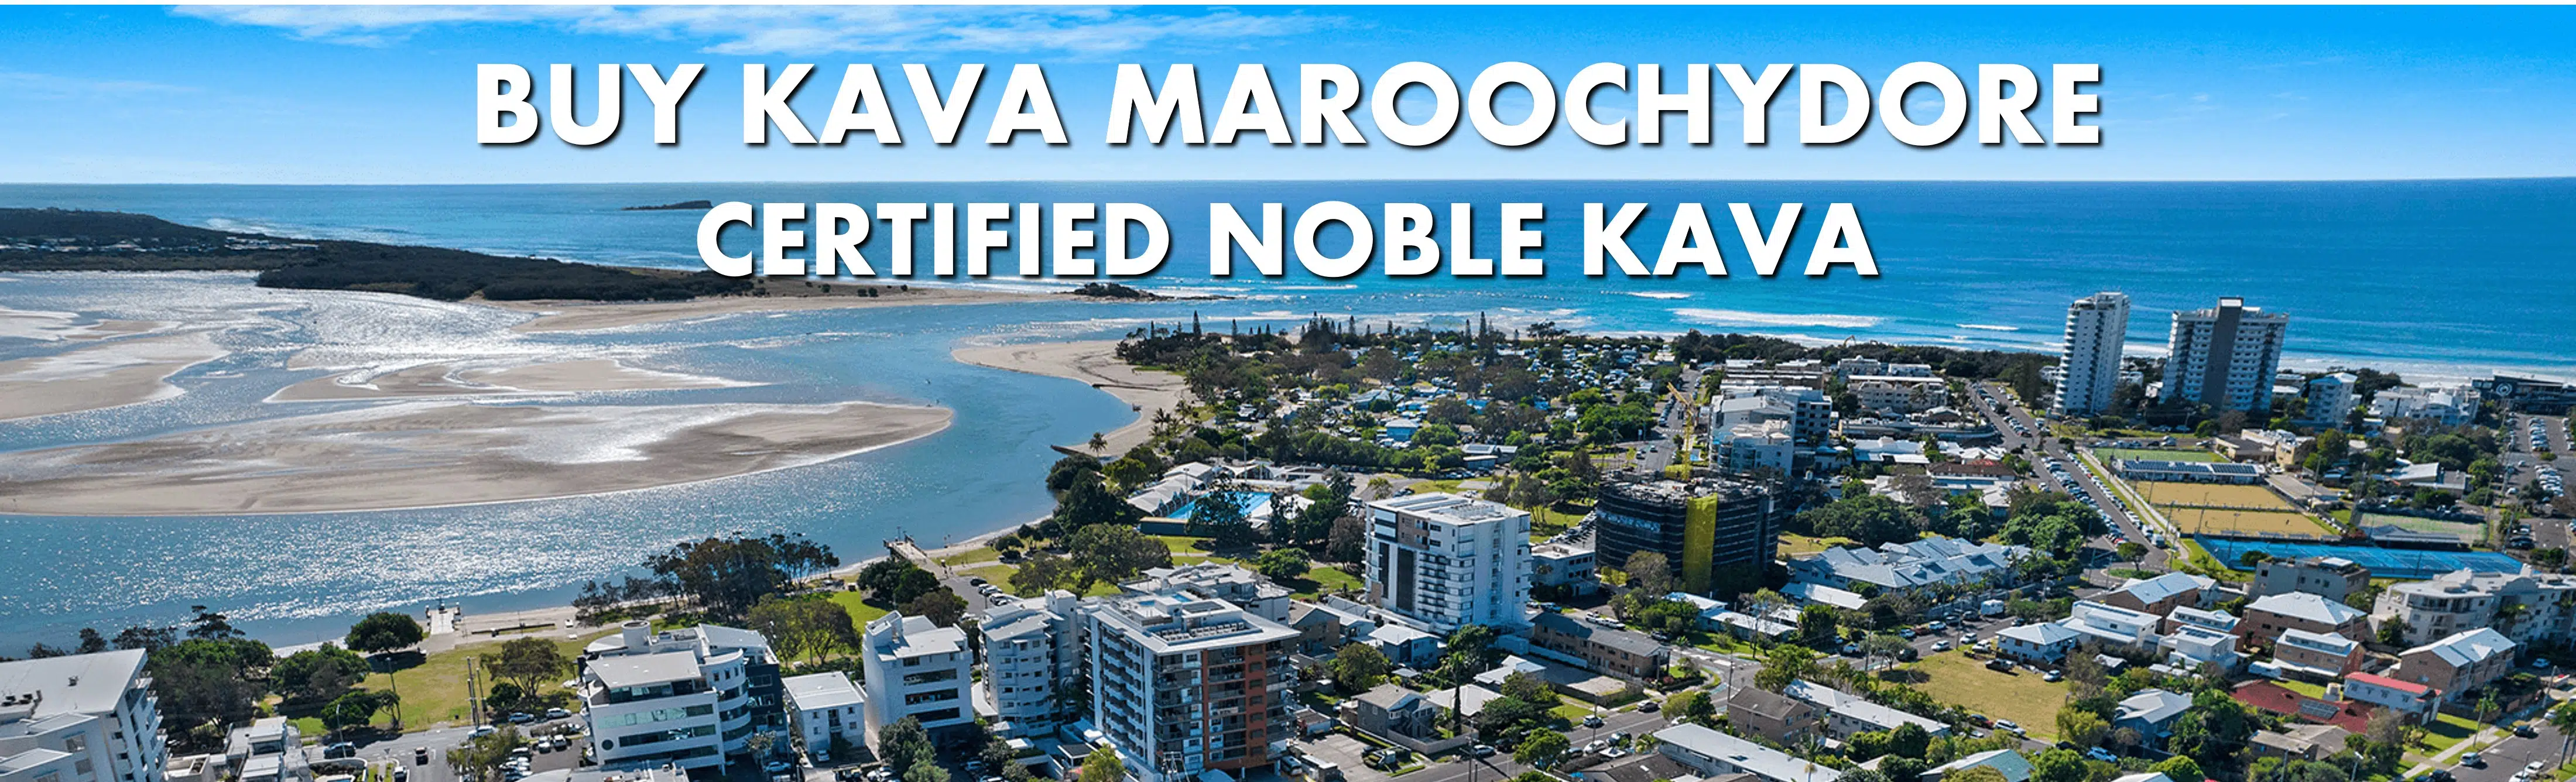 Aerial view of Maroochydore Sunshine Coast Queensland with caption Buy Kava Maroochydore Certified Noble Kava